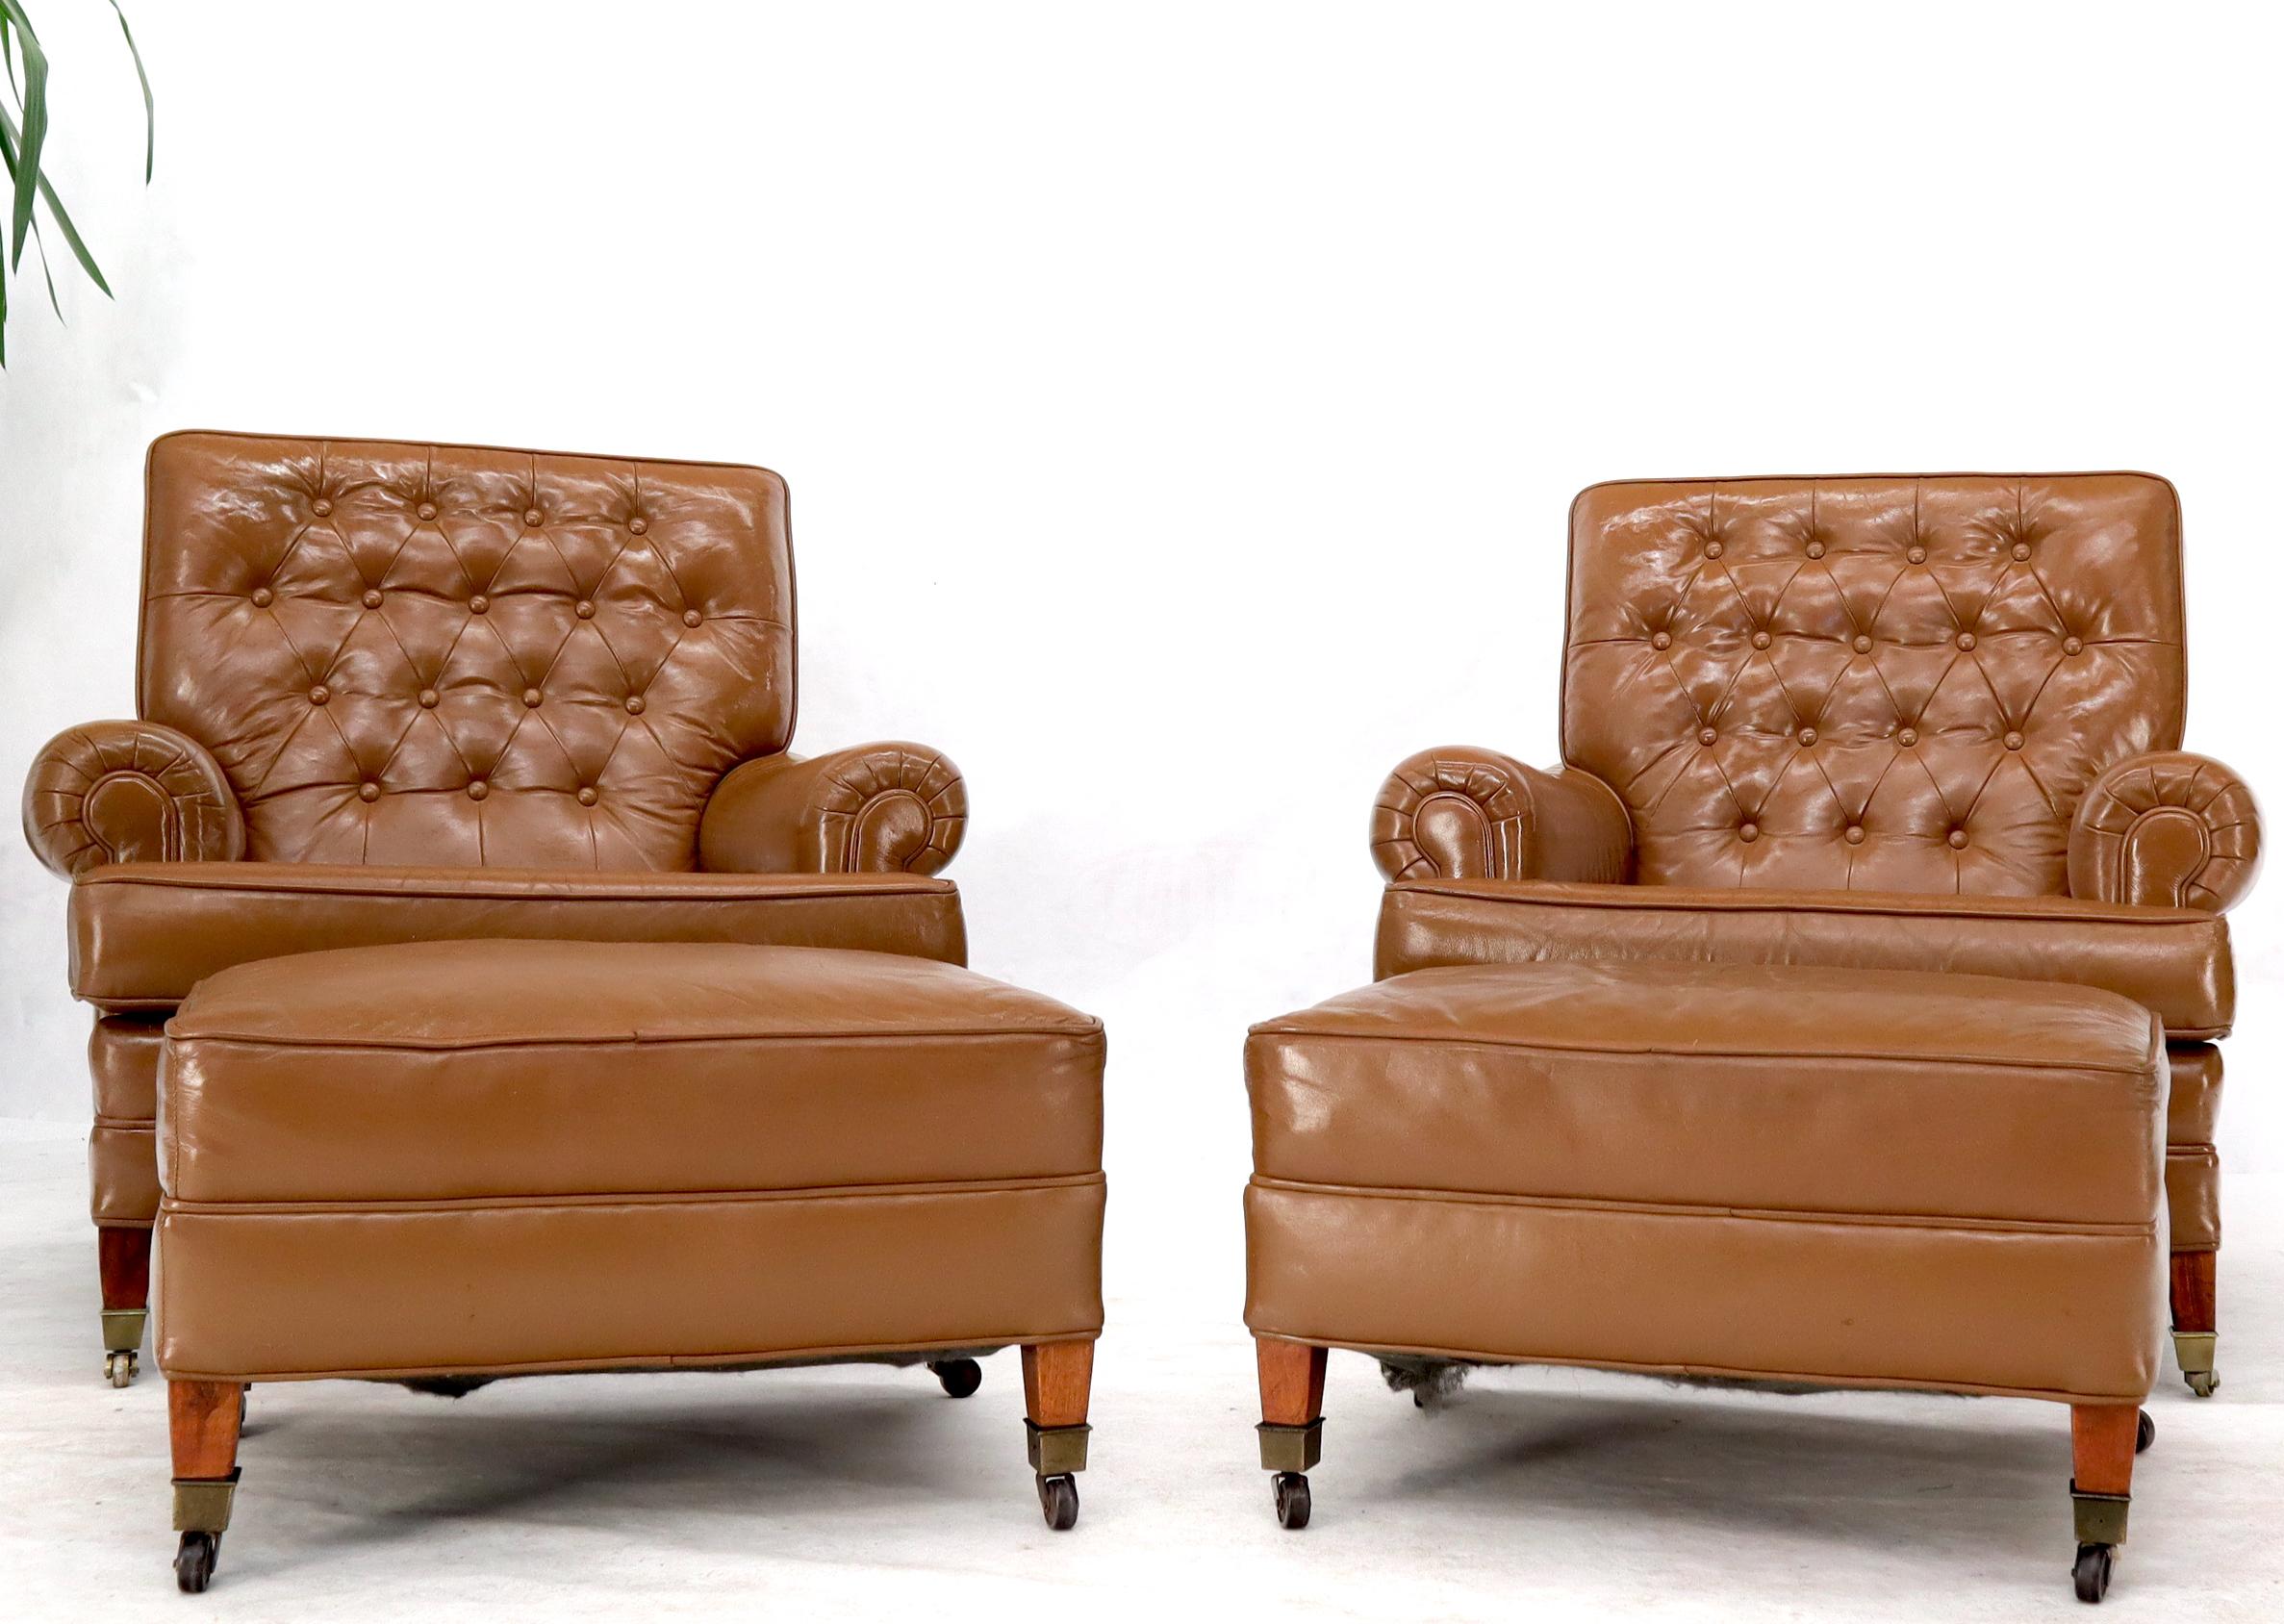 leather chairs with ottomans